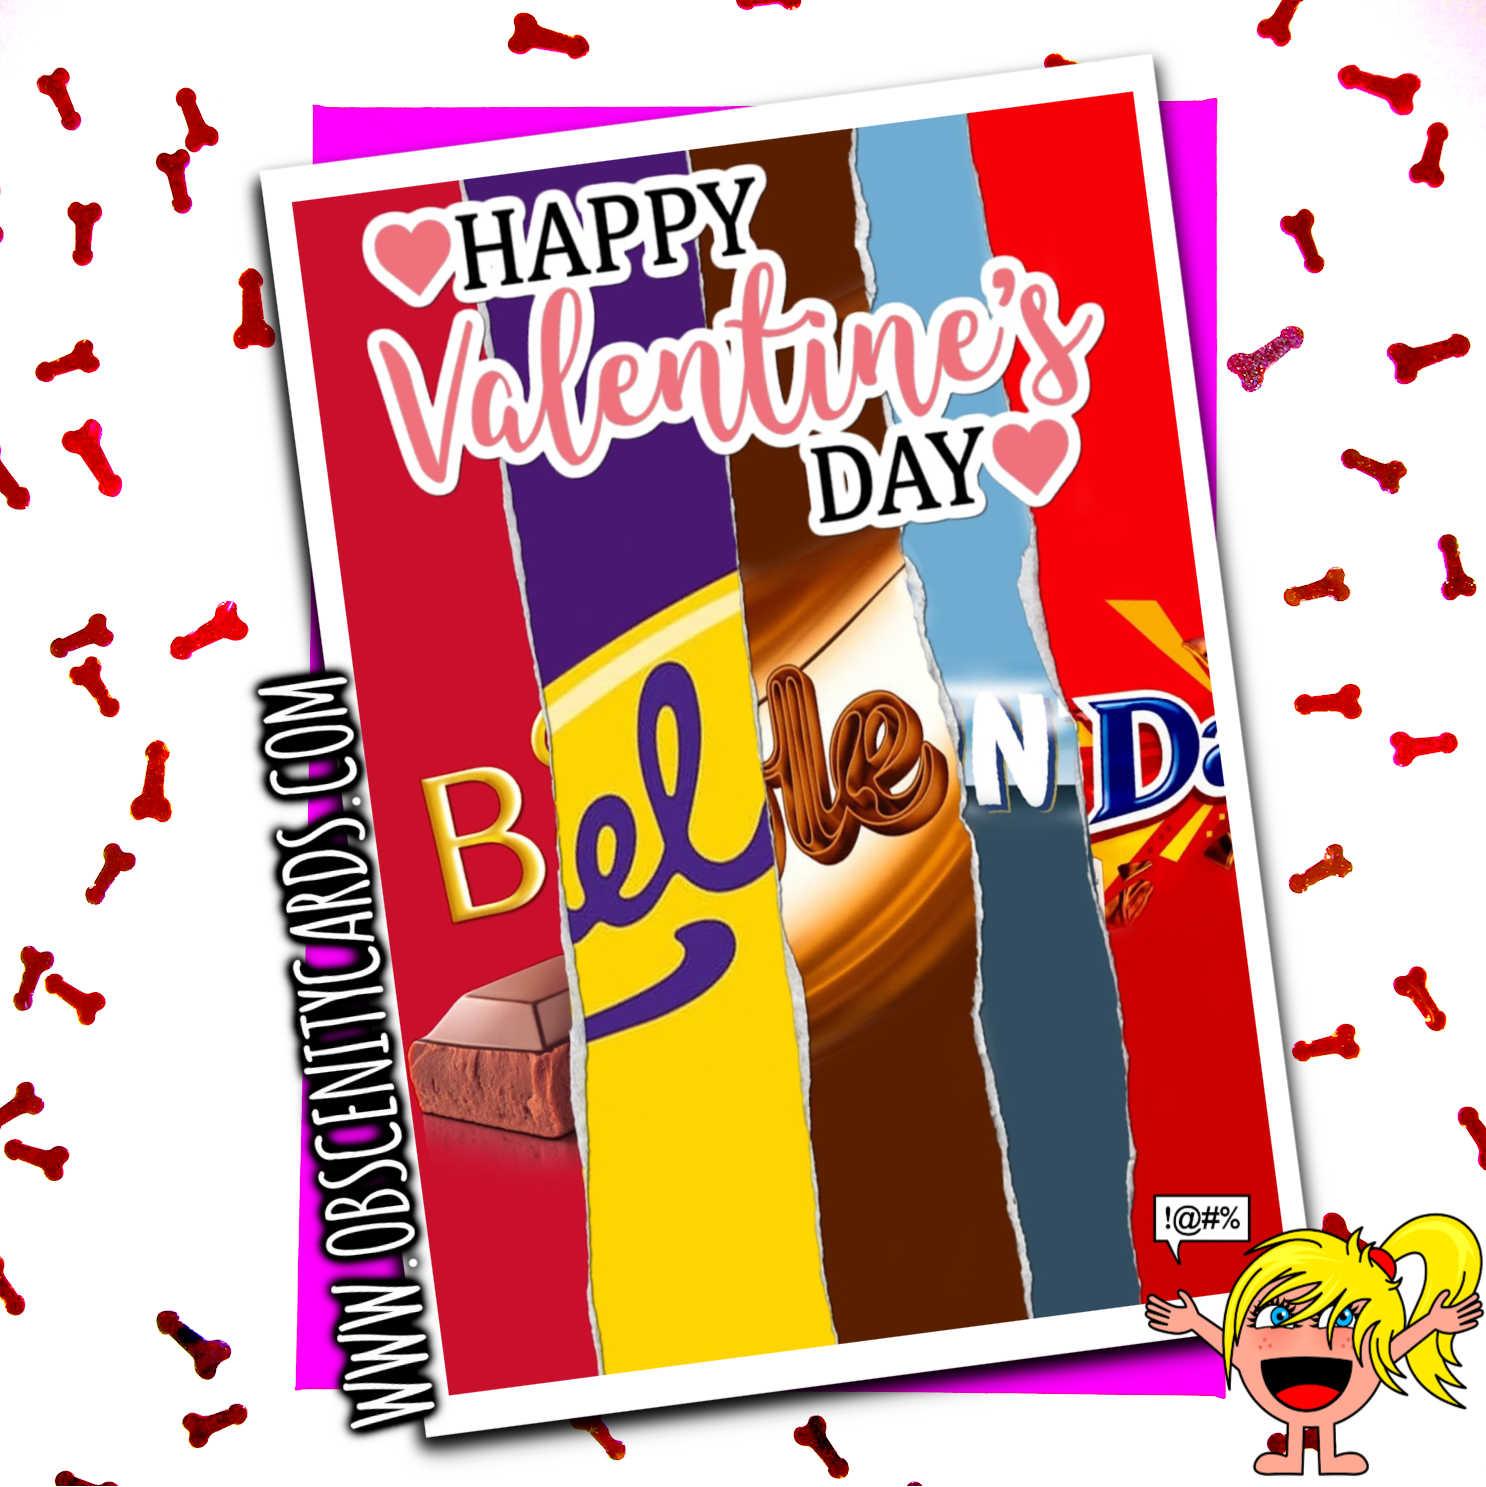 HAPPY VALENTINE'S DAY BELLEND CHOCOLATE WRAPPER FUNNY VALENTINES ANNIVERSARY CARD